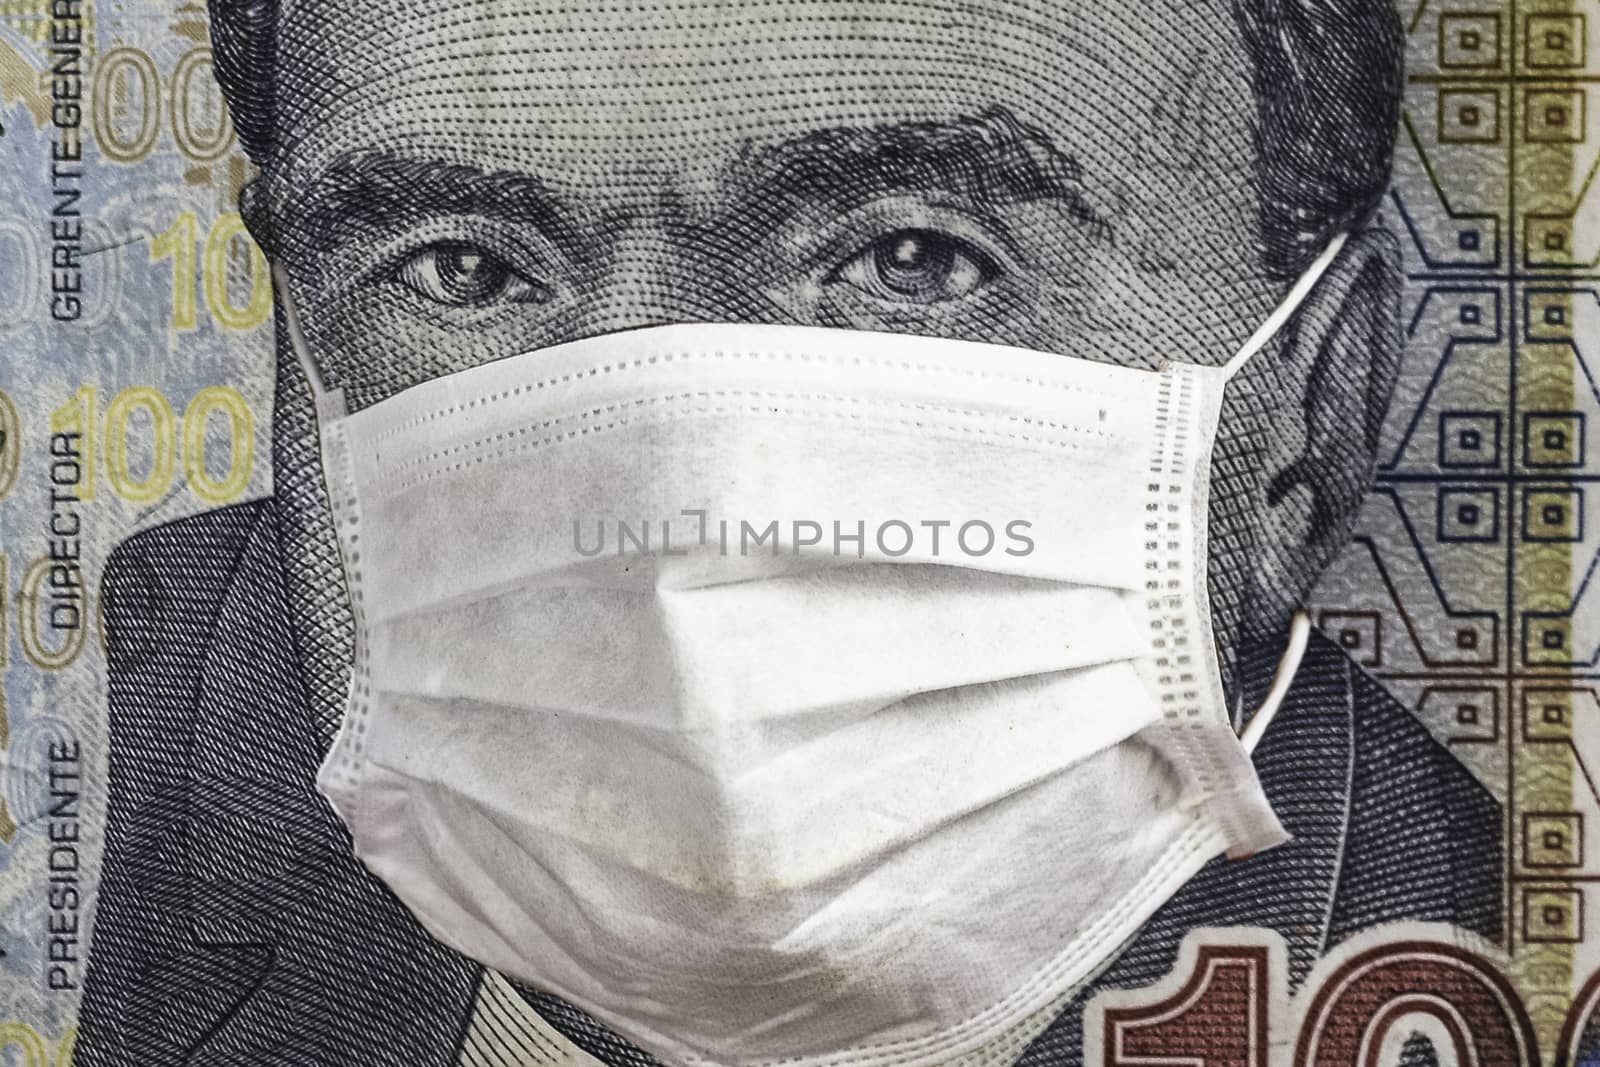 Concept: Quarantine in Peru, 100 Soles banknote with face mask. Economy and financial markets affected by corona virus outbreak and pandemic fears. by Peruphotoart